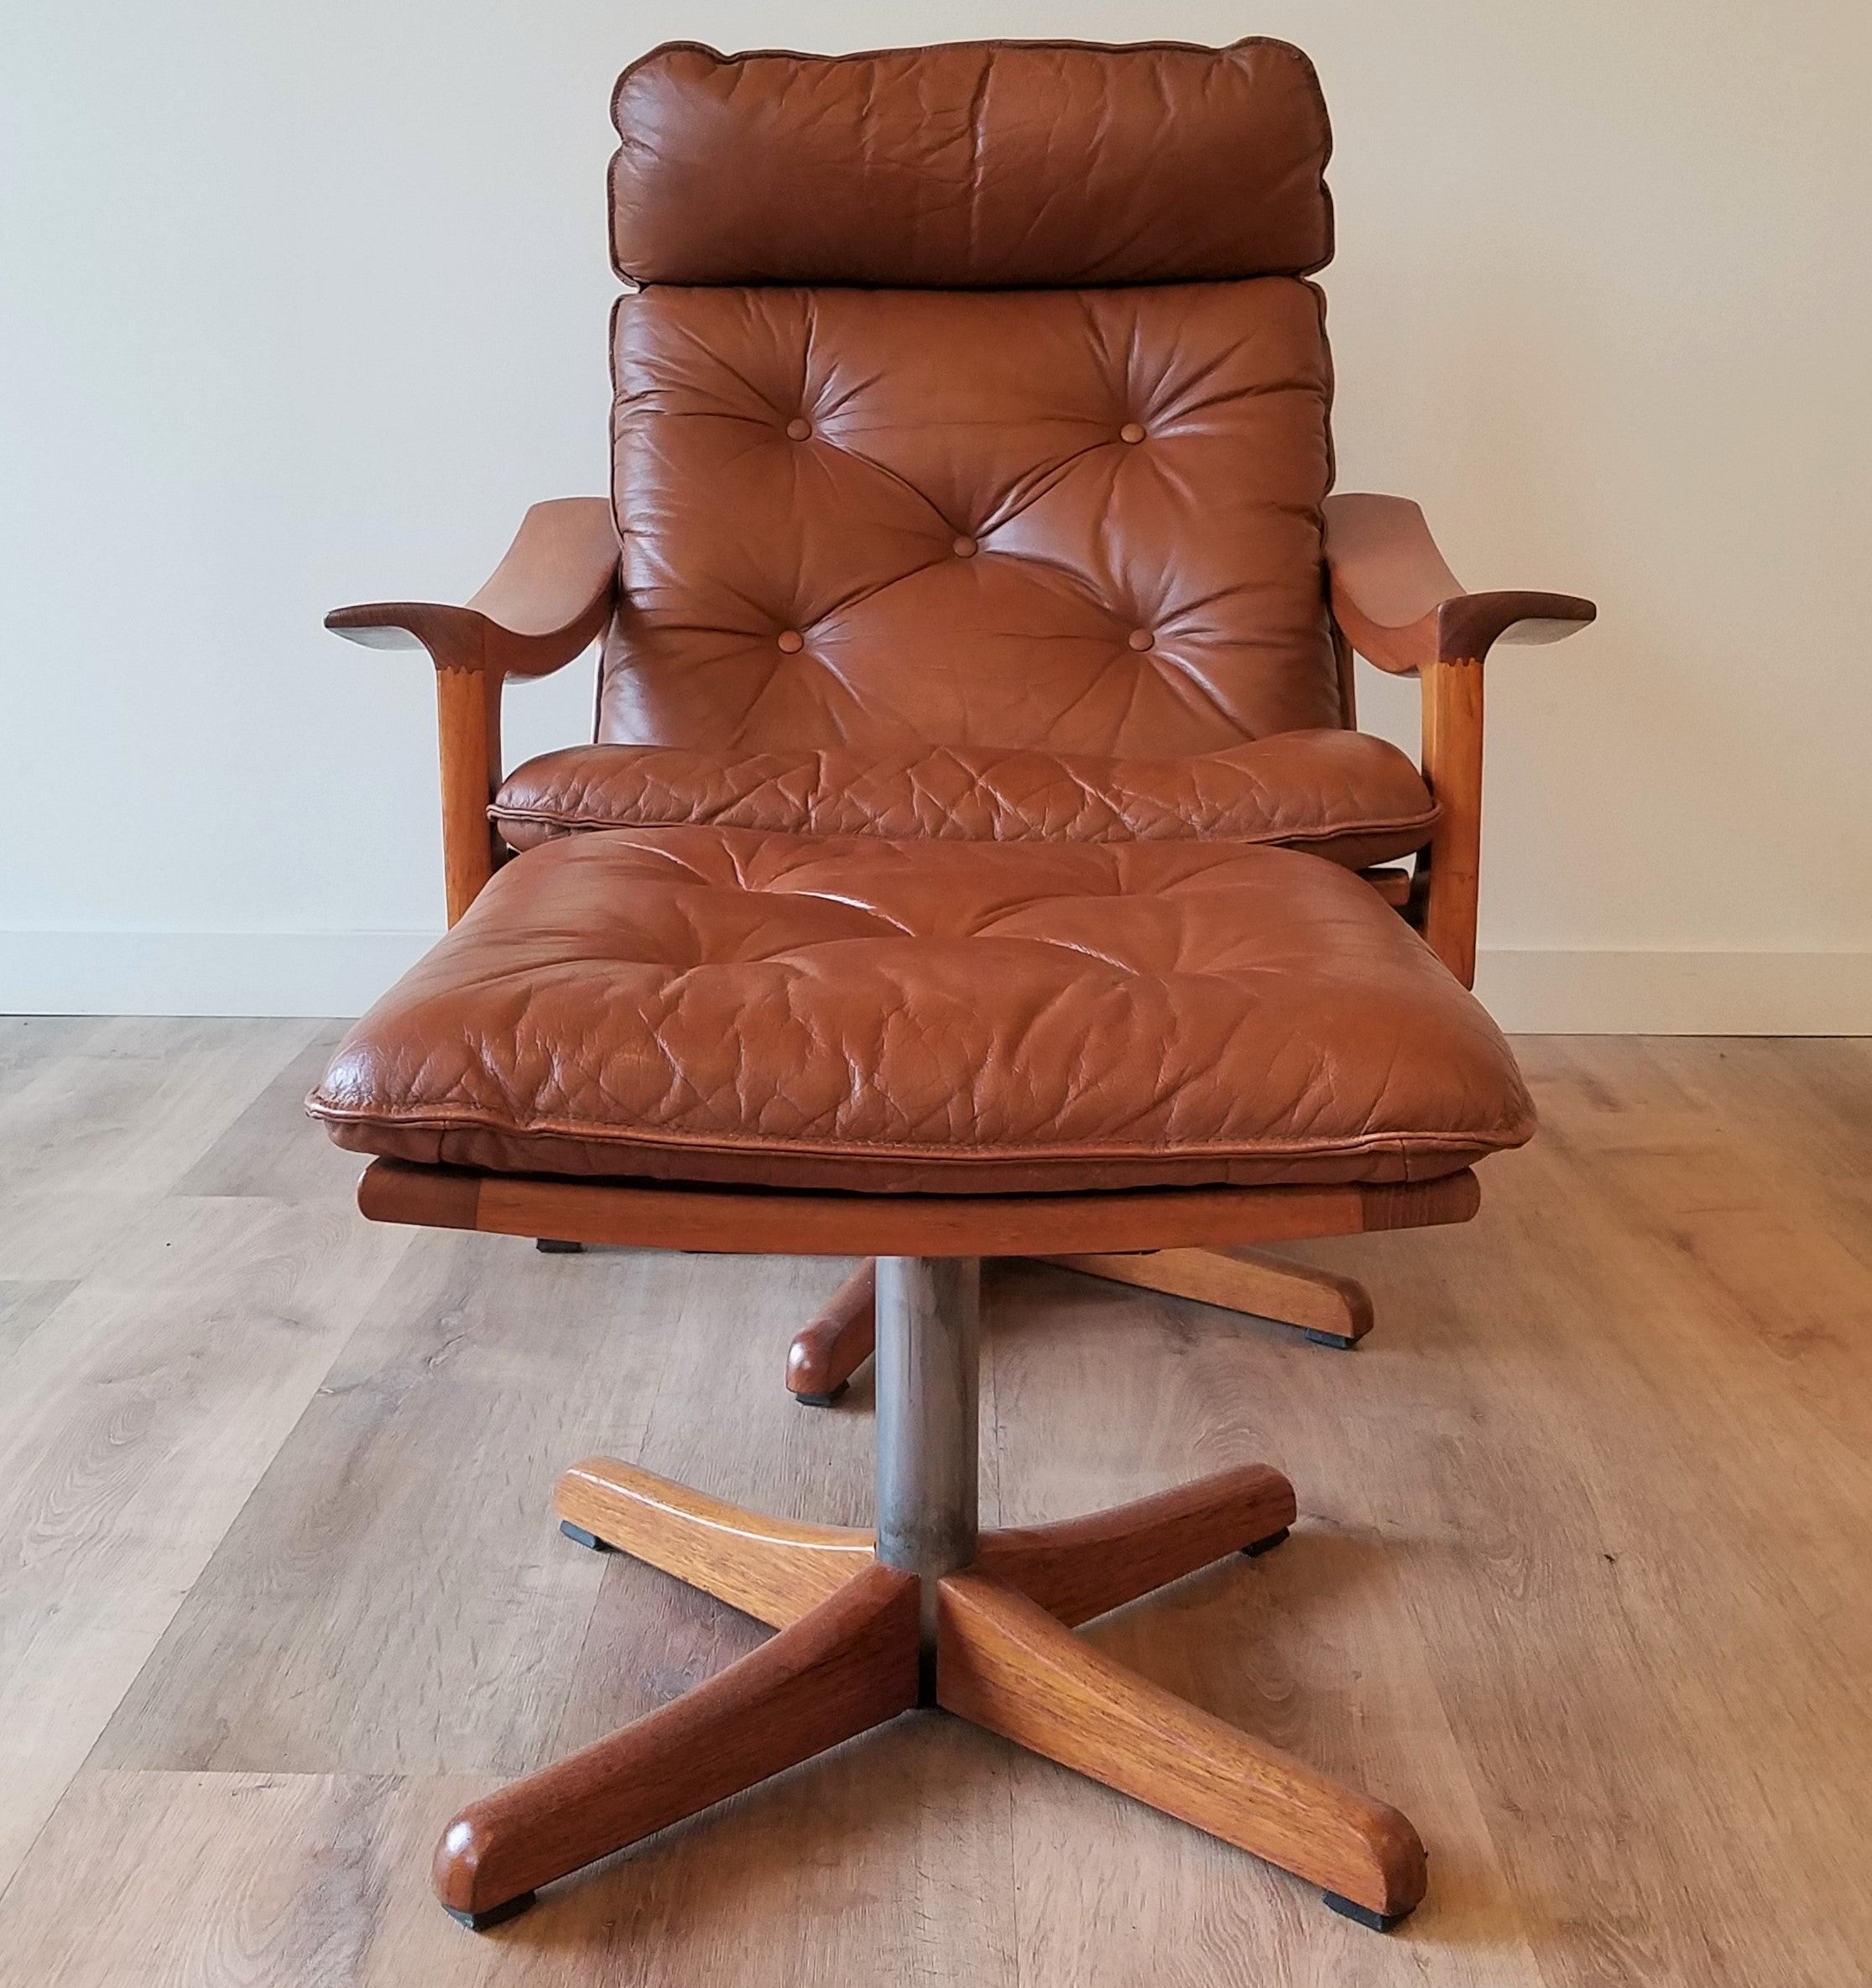 Lied Mobler Leather Swivel Recliner with Ottoman